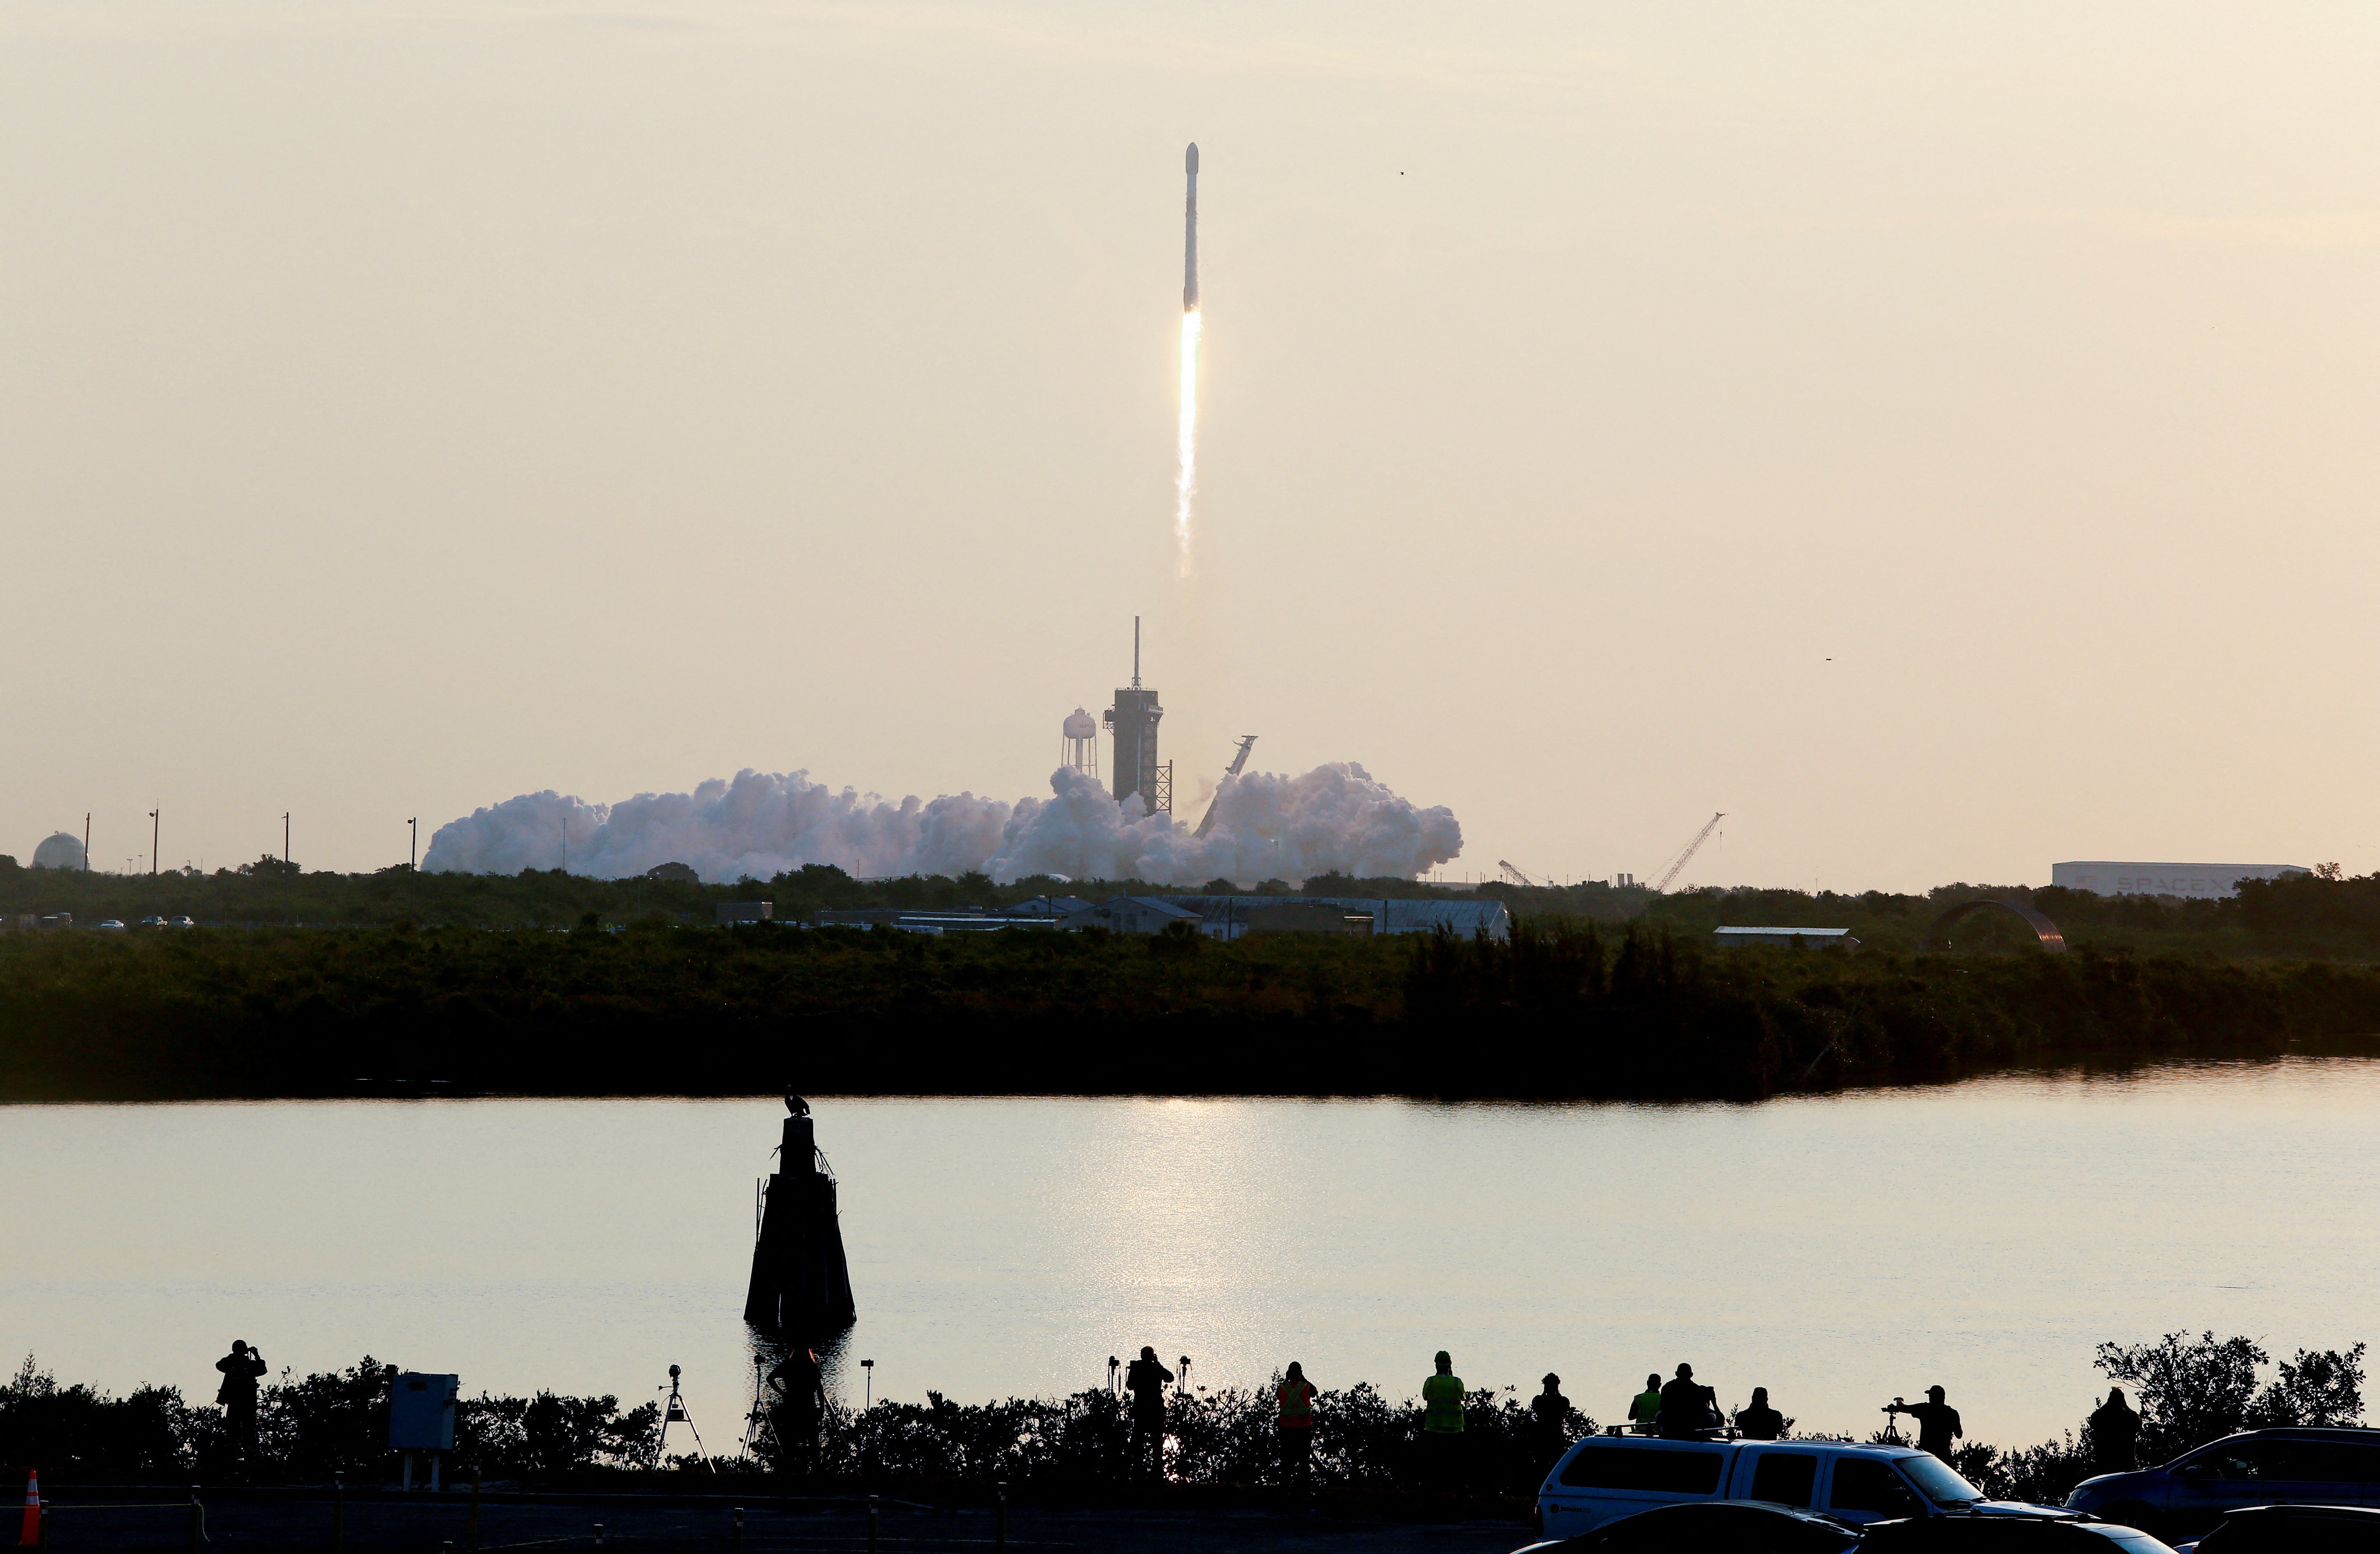 A SpaceX Falcon 9 rocket lifts off carrying 53 Starlink internet satellites, from the Kennedy Space Center in Cape Canaveral, Florida